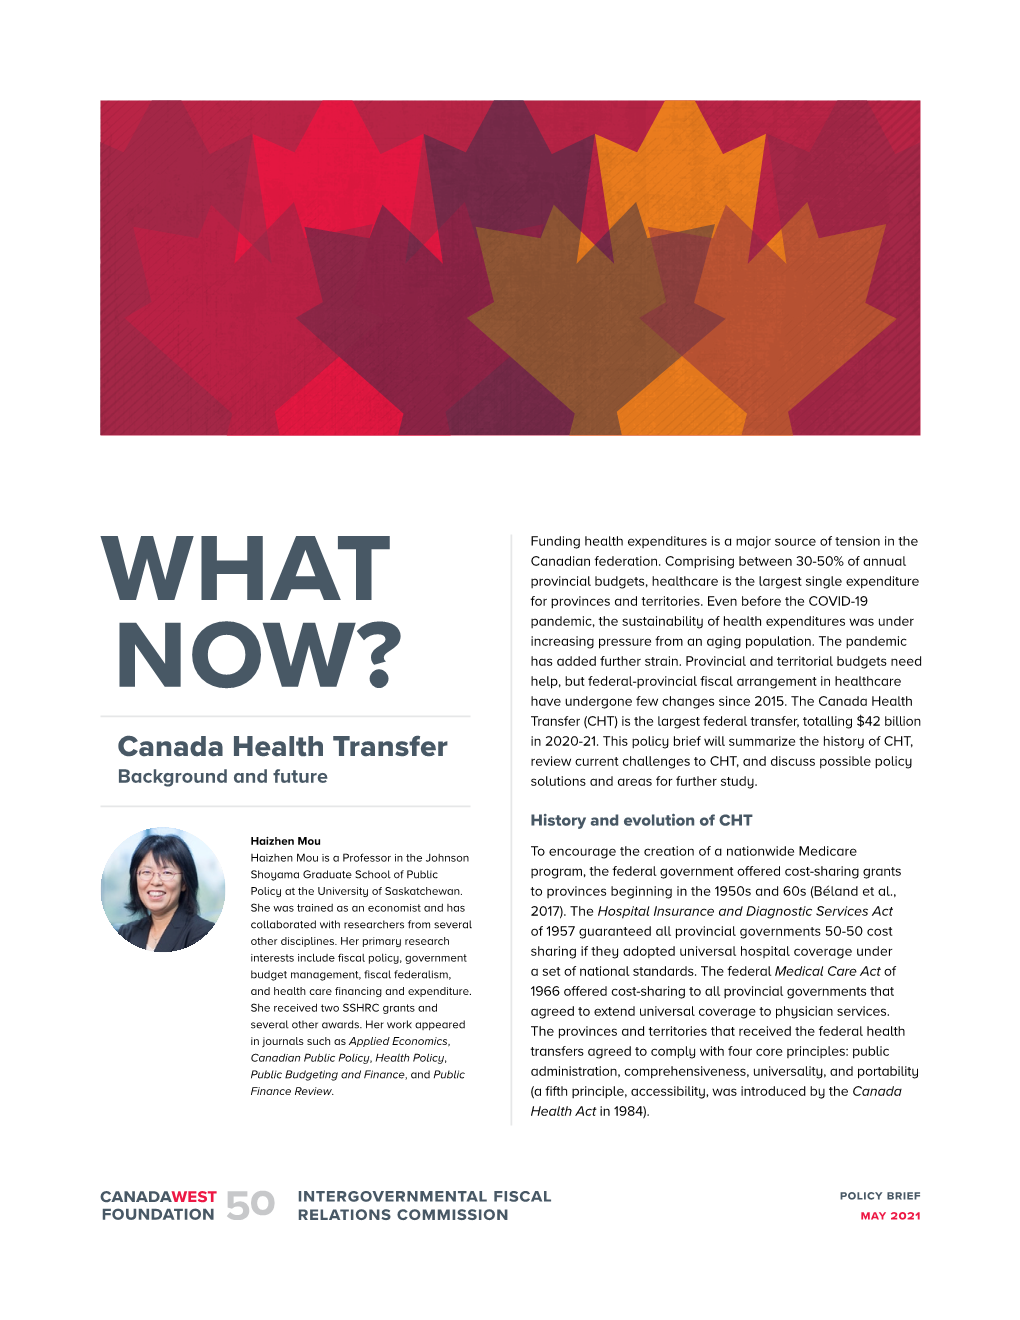 Canada Health Transfer (CHT) Is the Largest Federal Transfer, Totalling $42 Billion in 2020-21